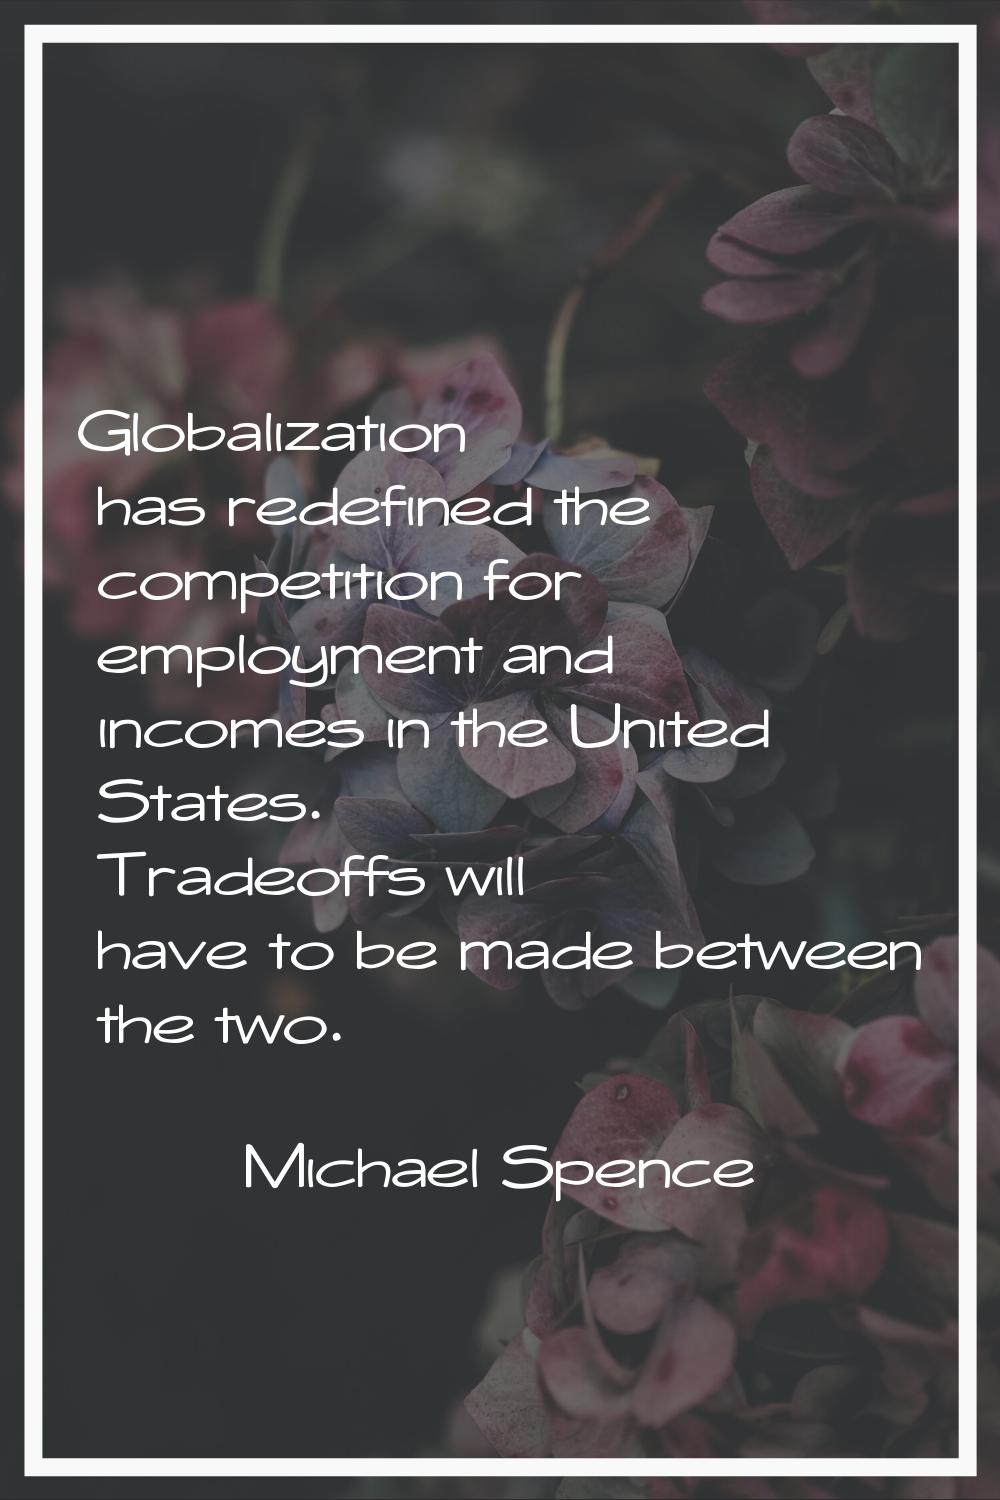 Globalization has redefined the competition for employment and incomes in the United States. Tradeo